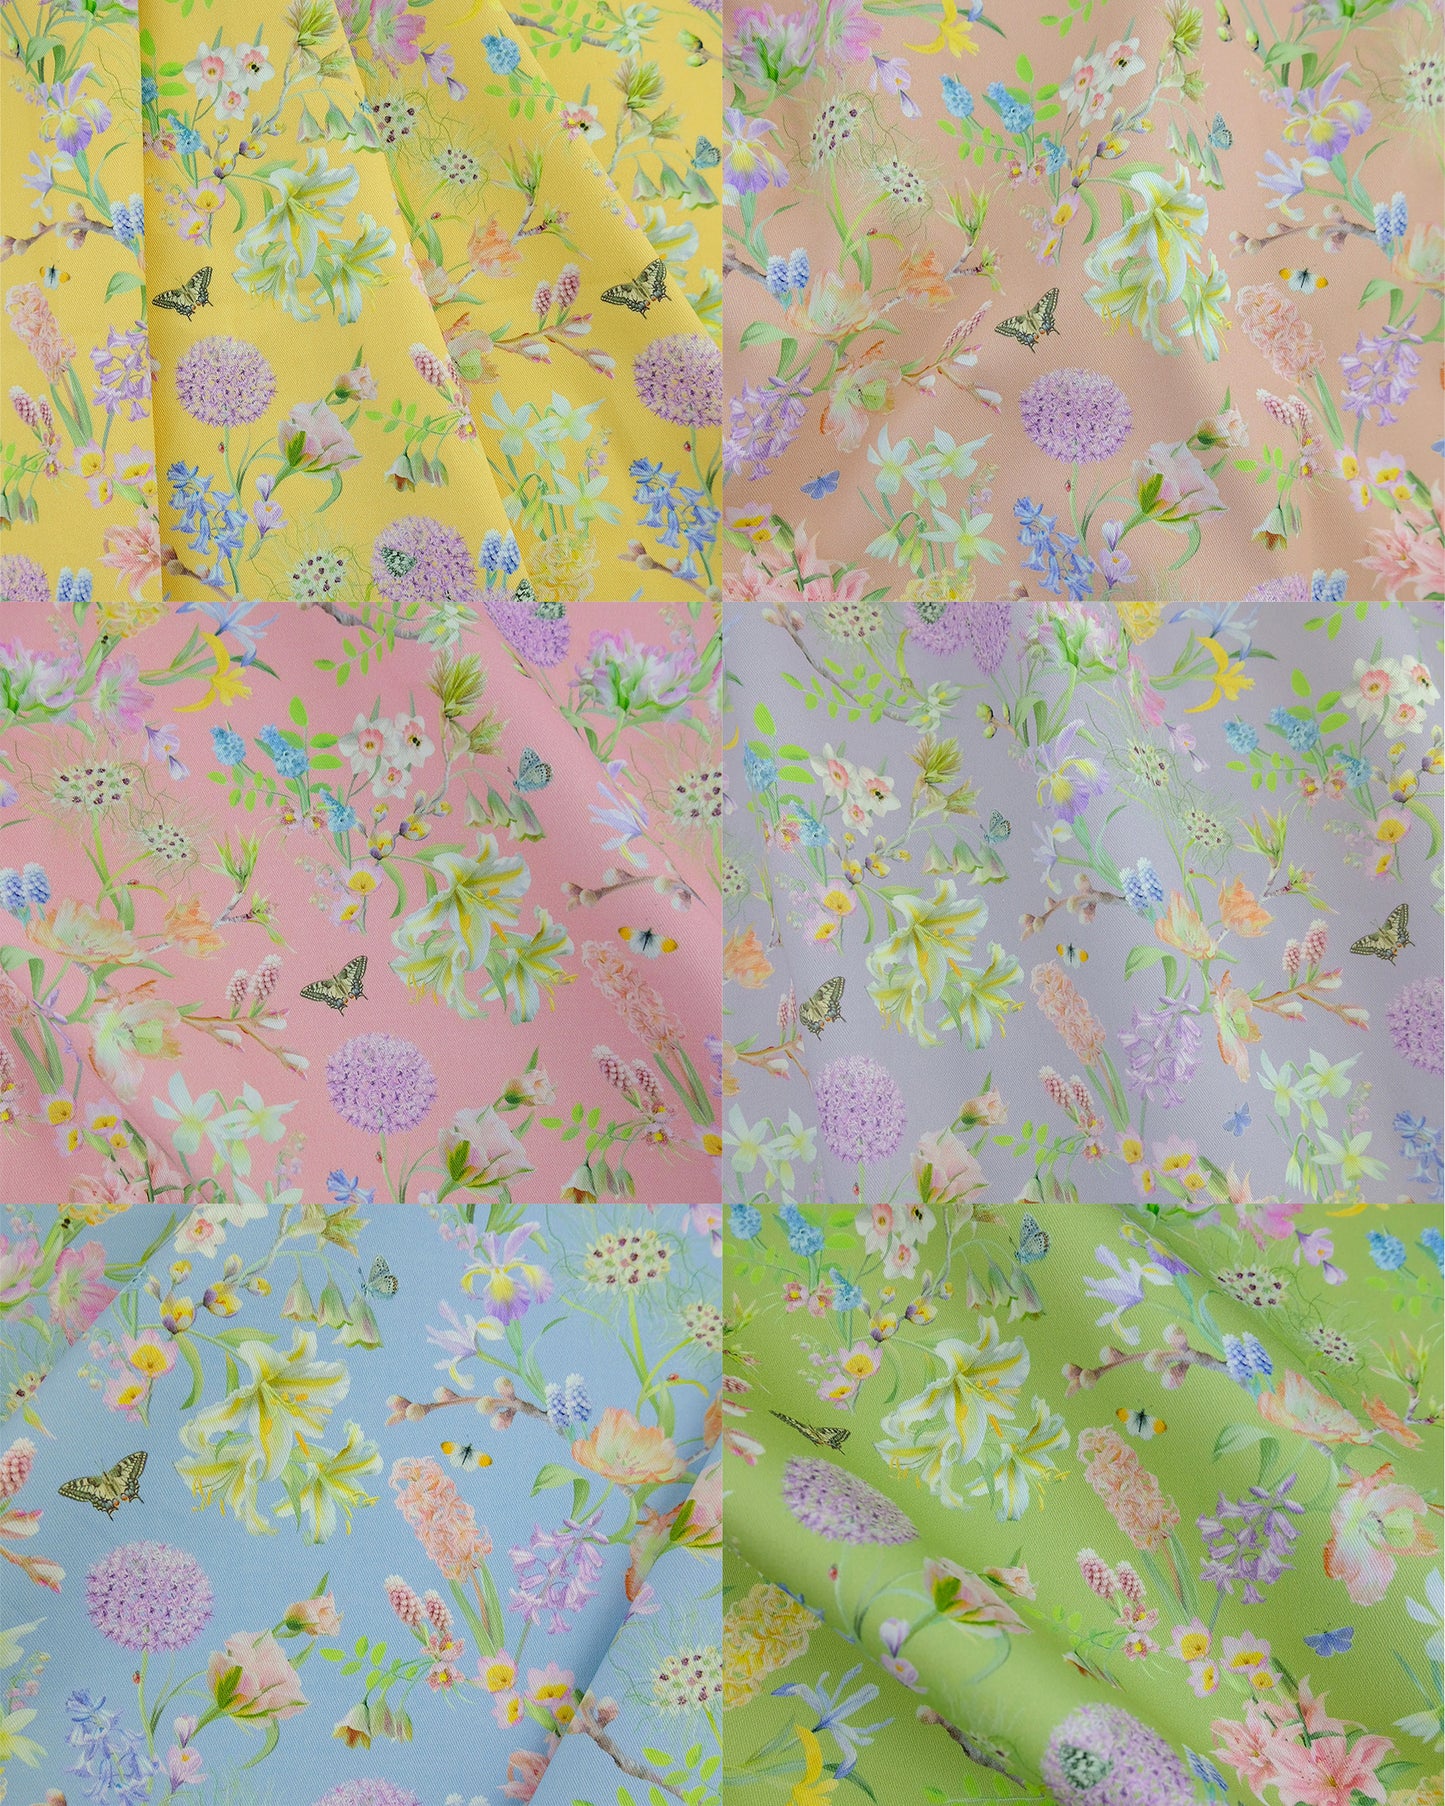 a rainbow of hopeful beginnings 100% organic cotton twill fabric with soft pastel florals in yellow, peach, pink, purple, blue and green.